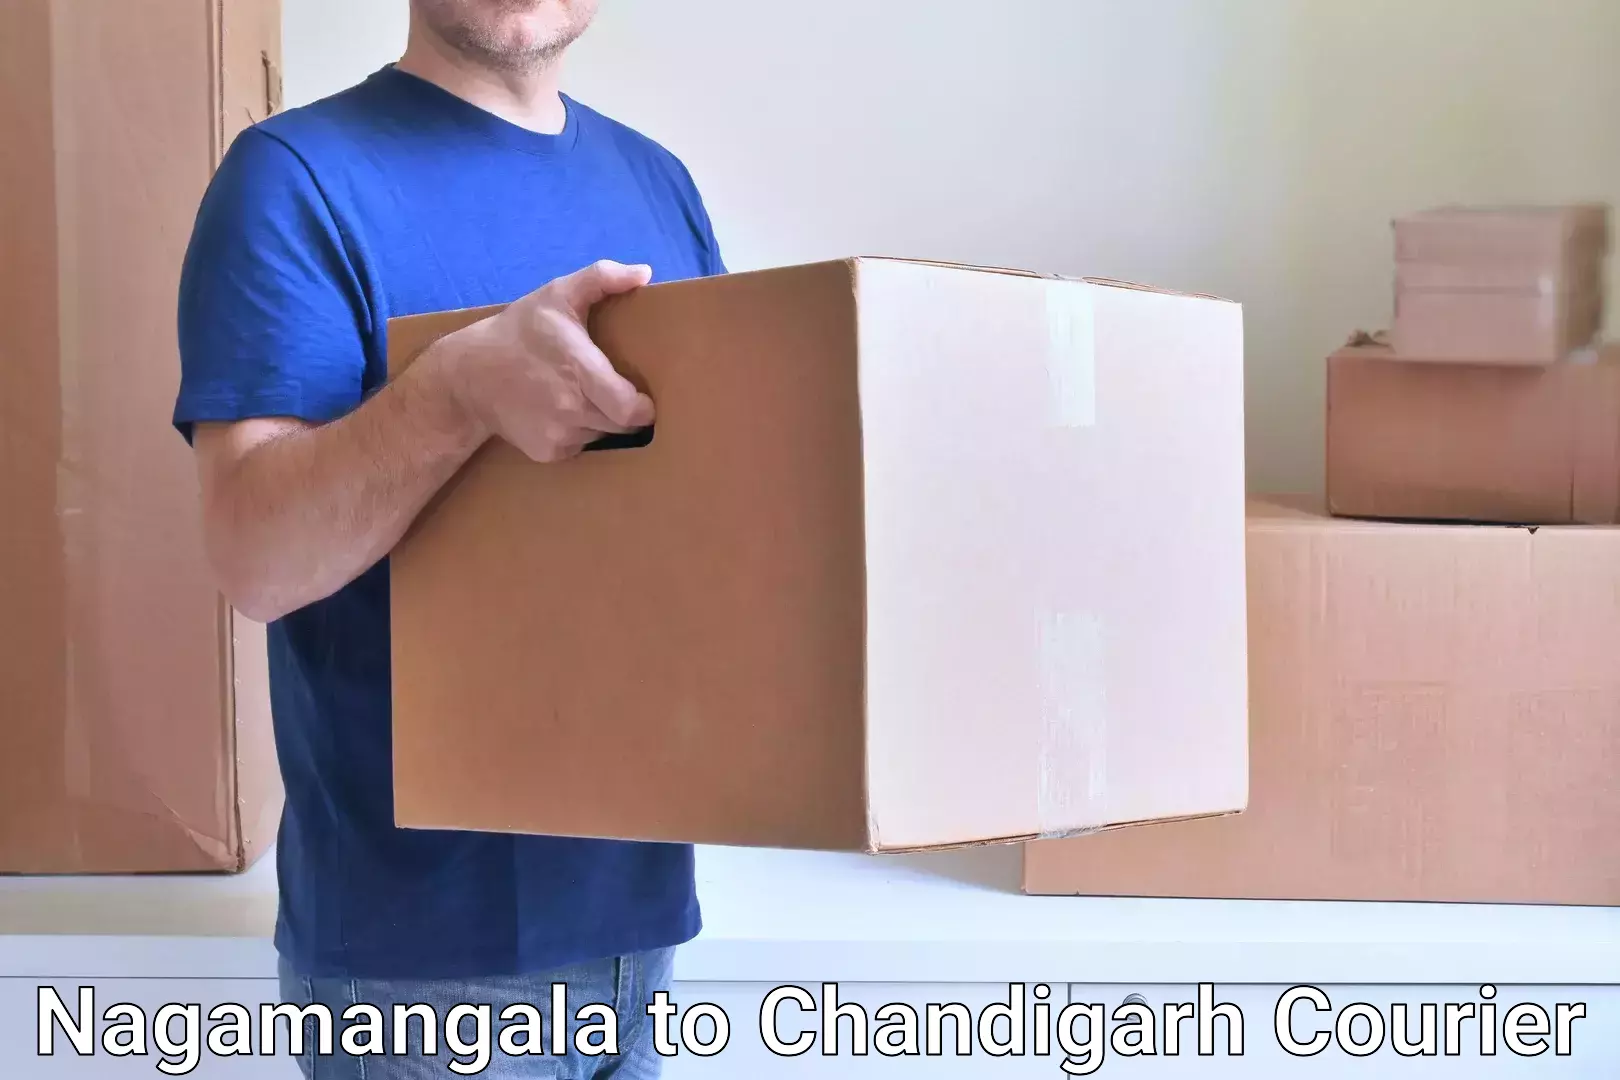 Speedy delivery service Nagamangala to Chandigarh